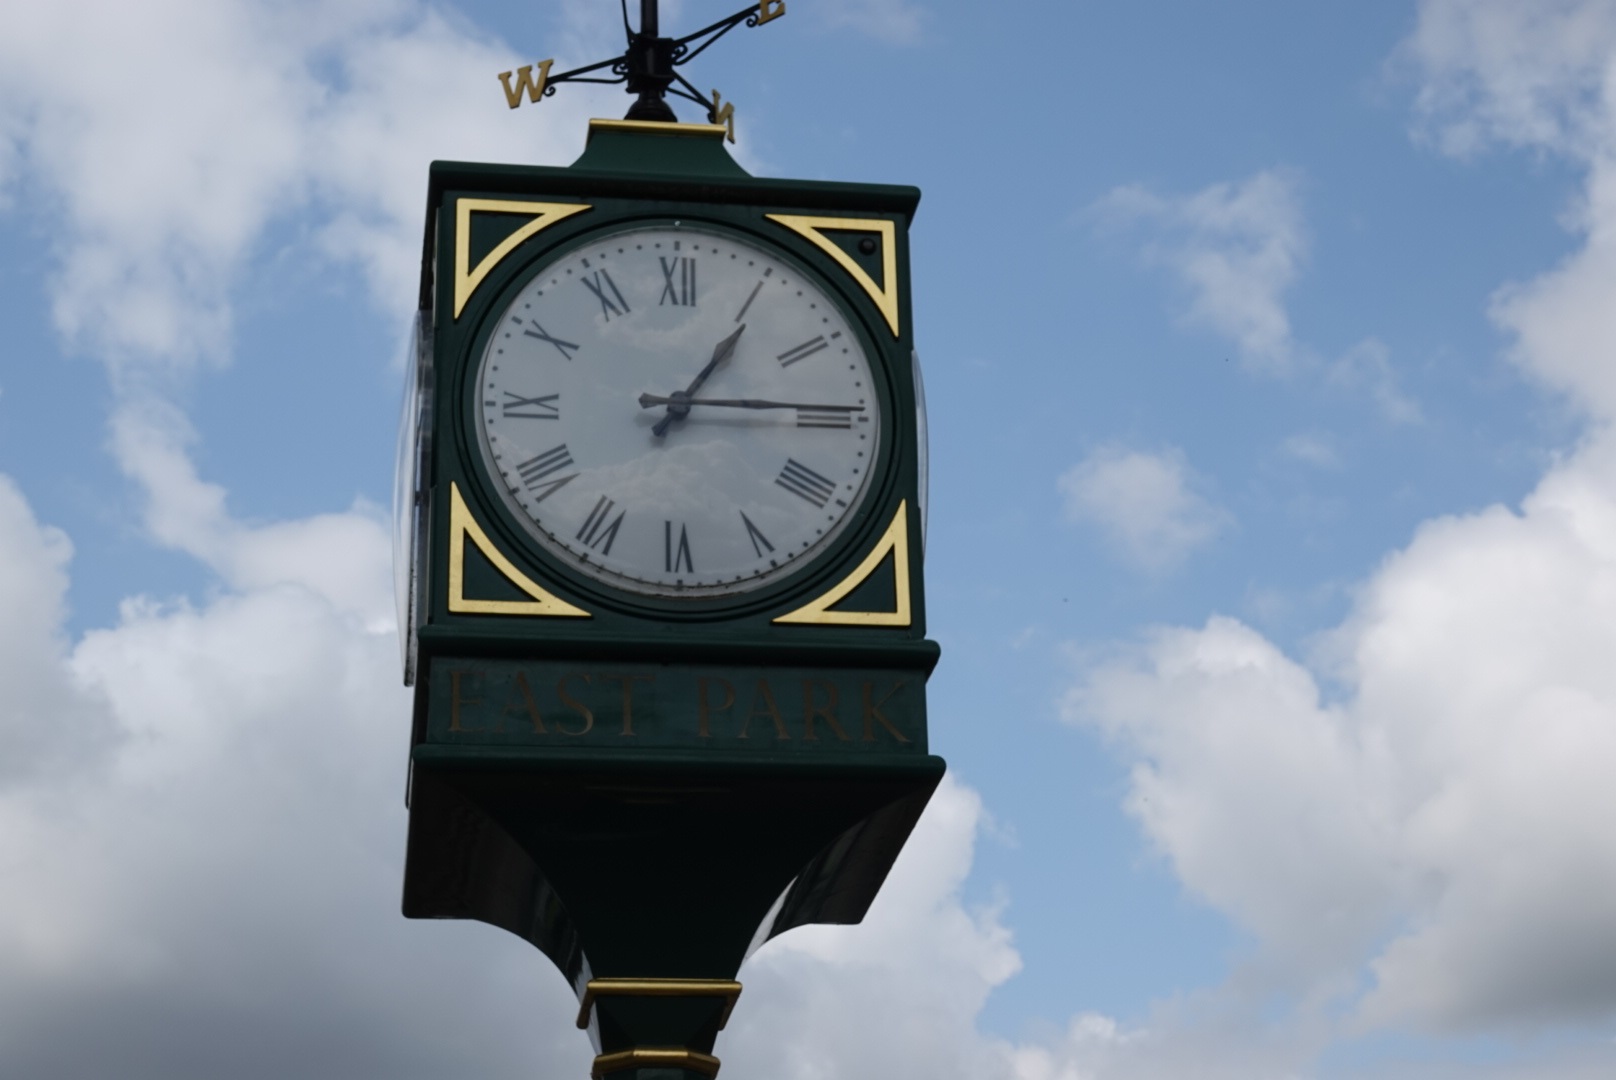 The clock at East Park.